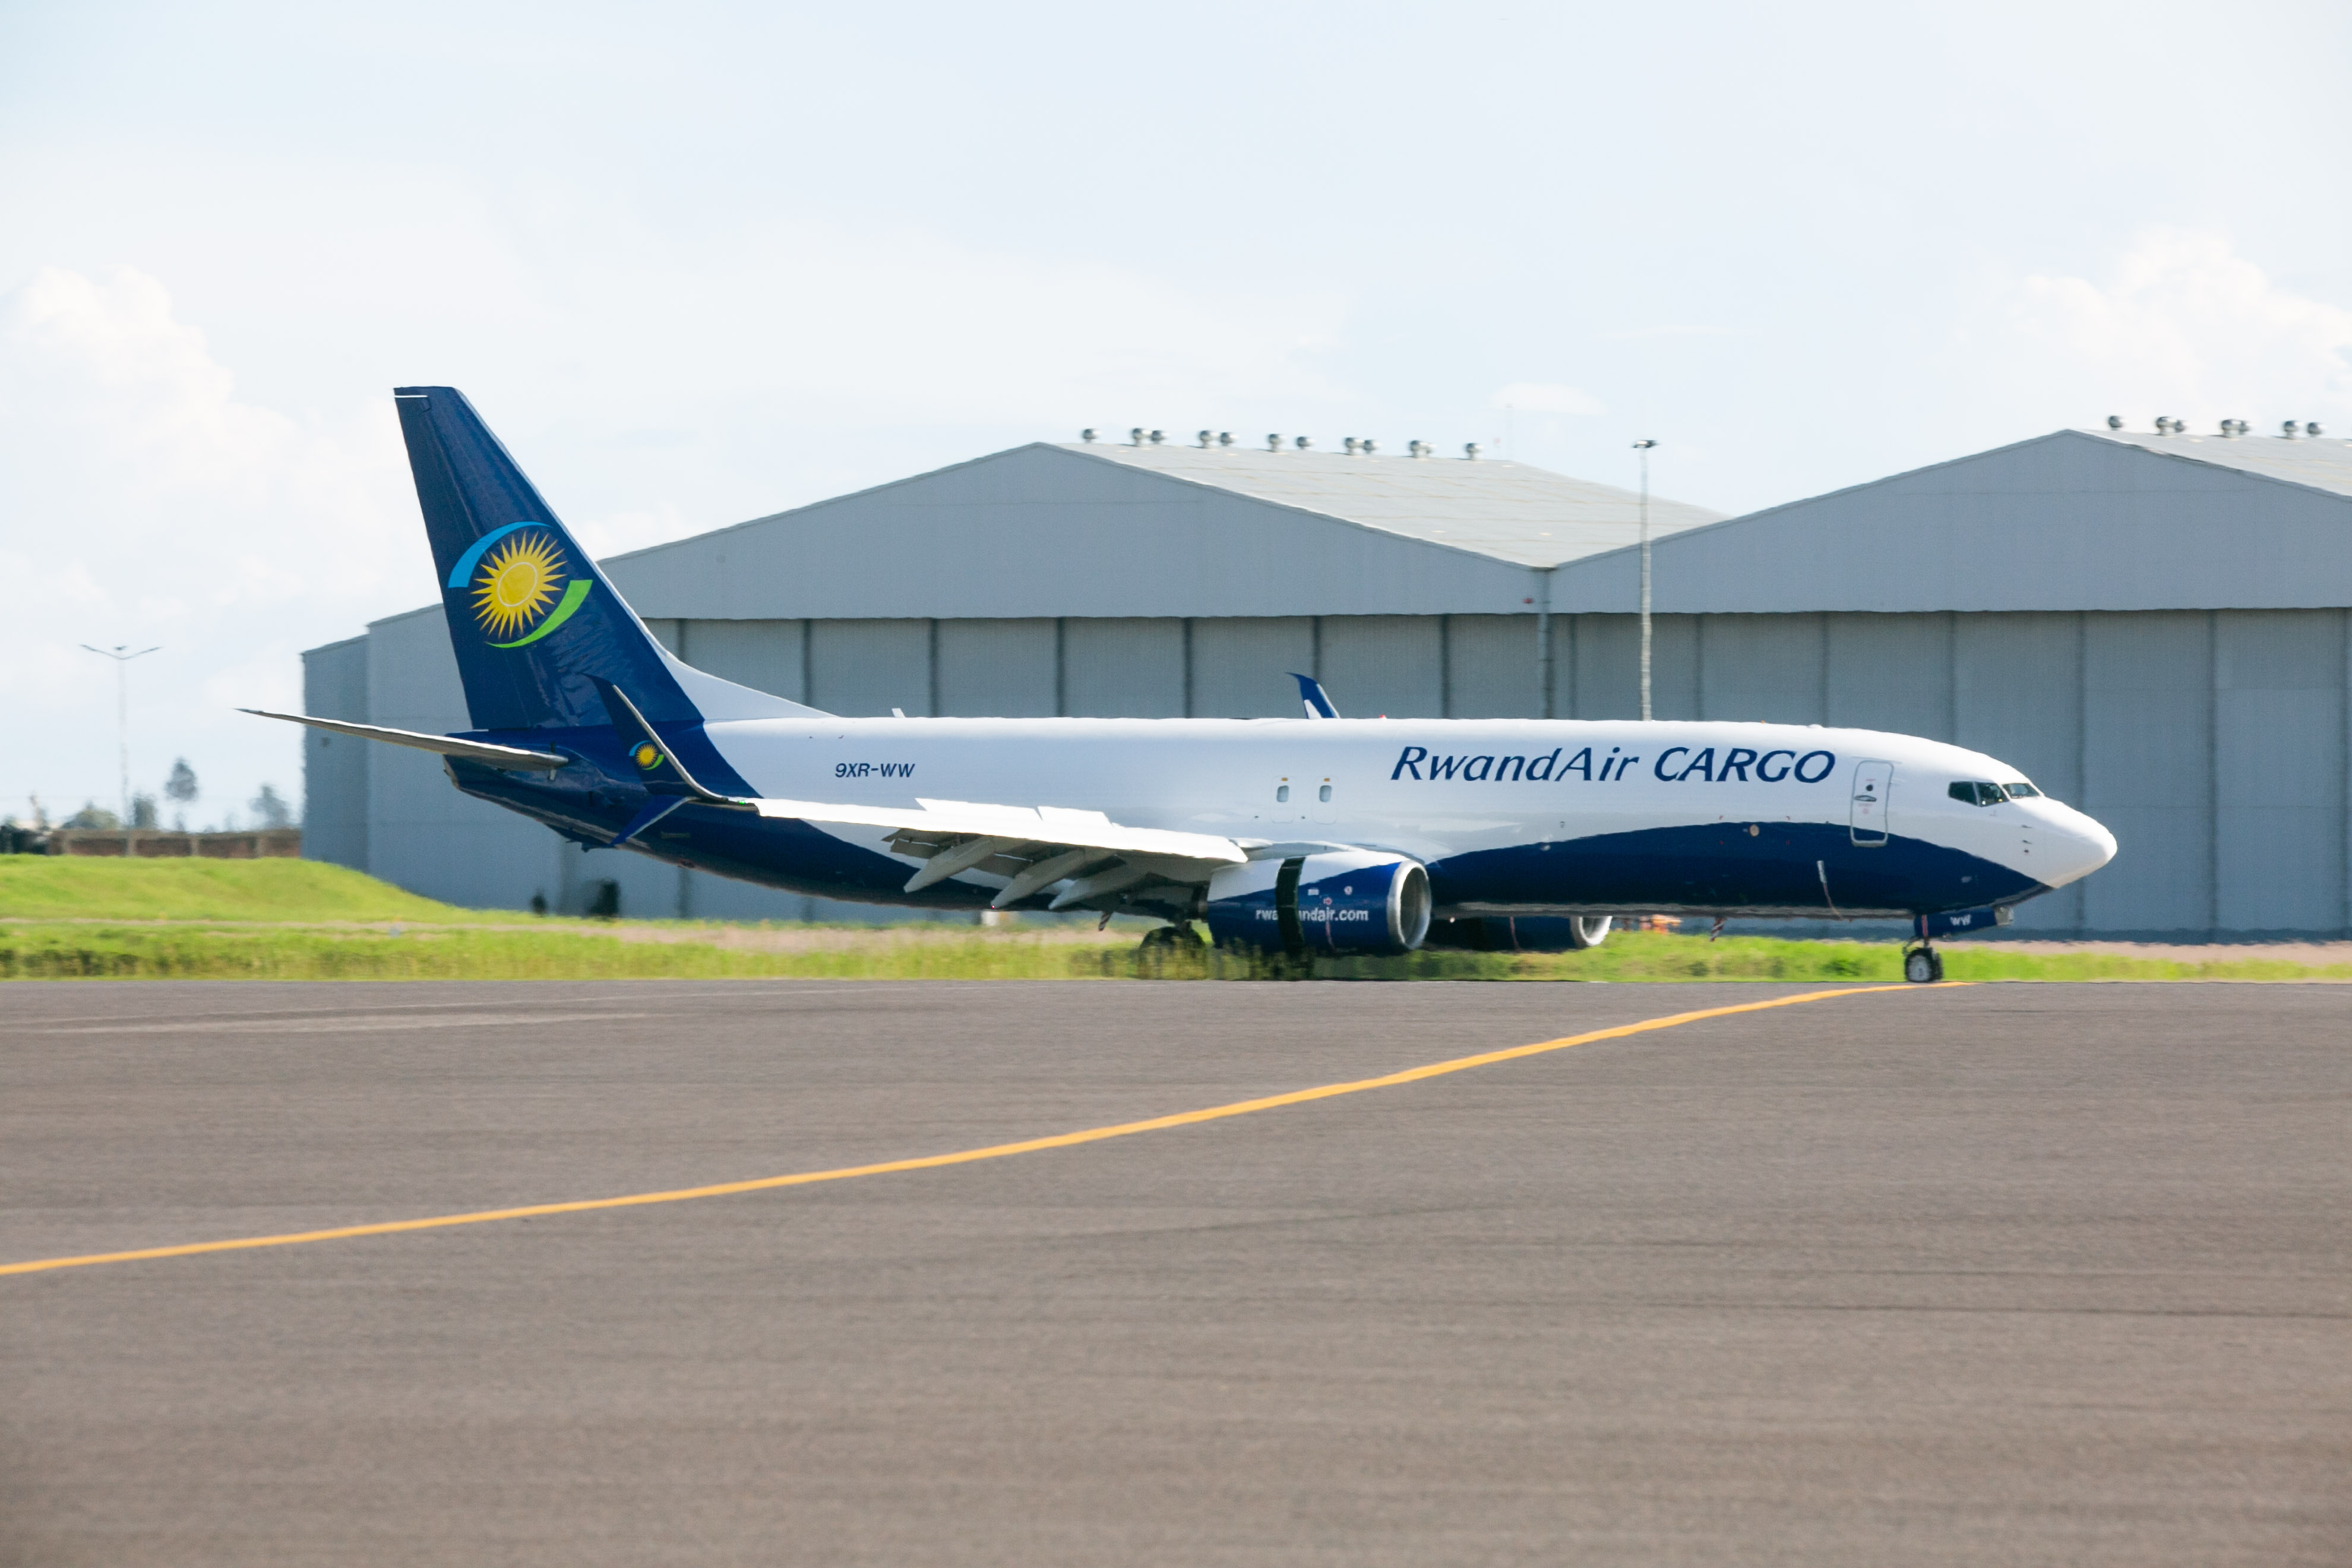 RwandAir takes delivery of its first dedicated freighter